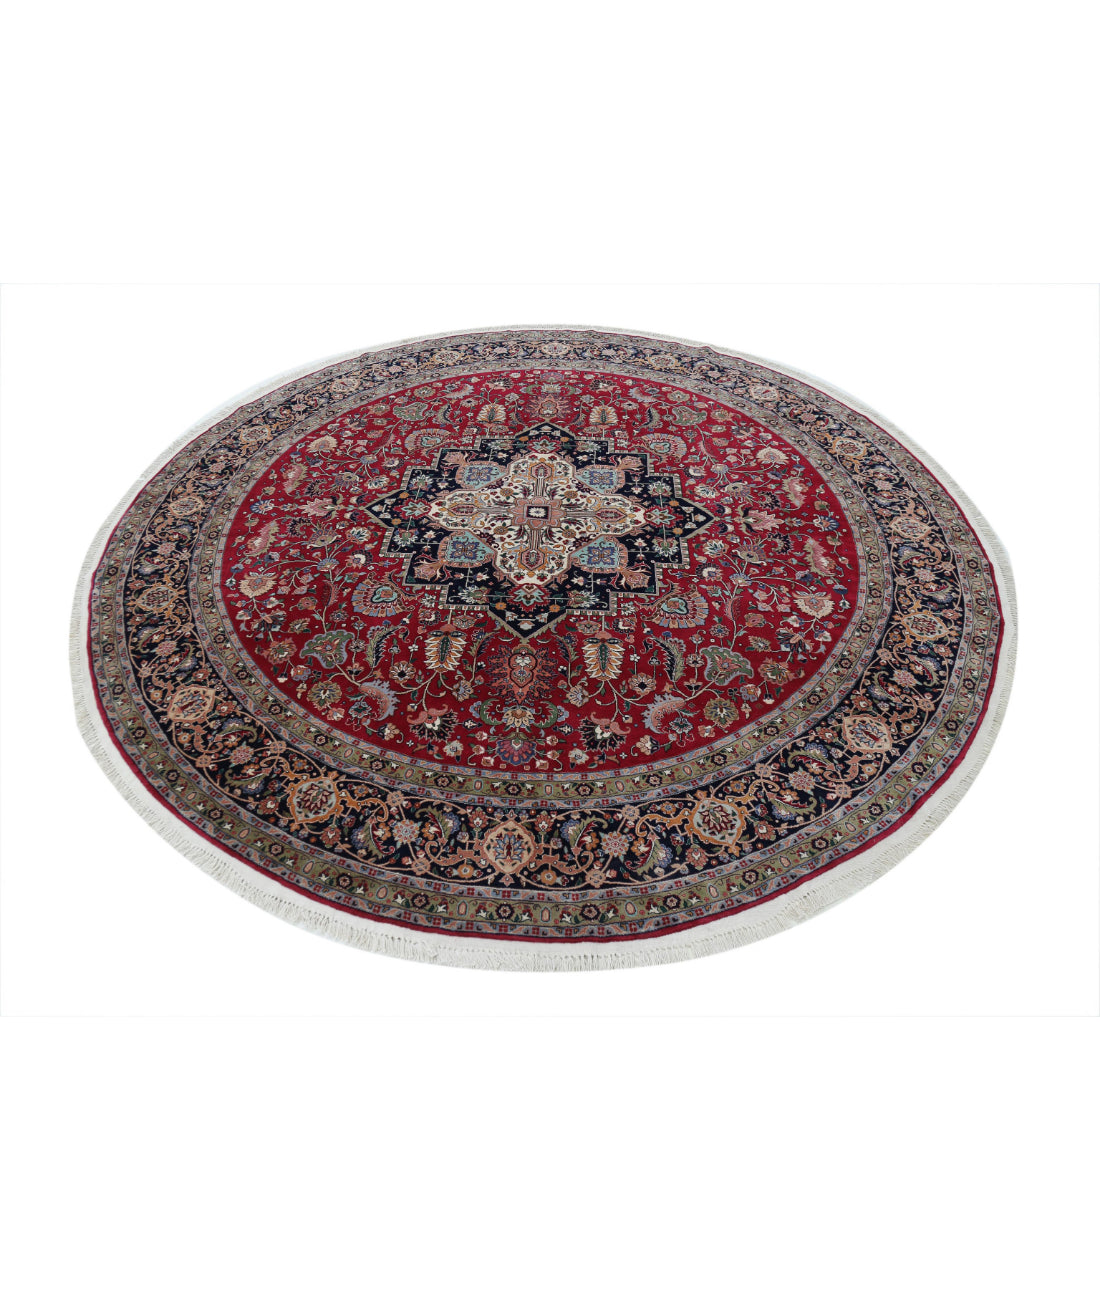 Heritage 8'0'' X 8'3'' Hand-Knotted Wool Rug 8'0'' x 8'3'' (240 X 248) / Pink / Blue